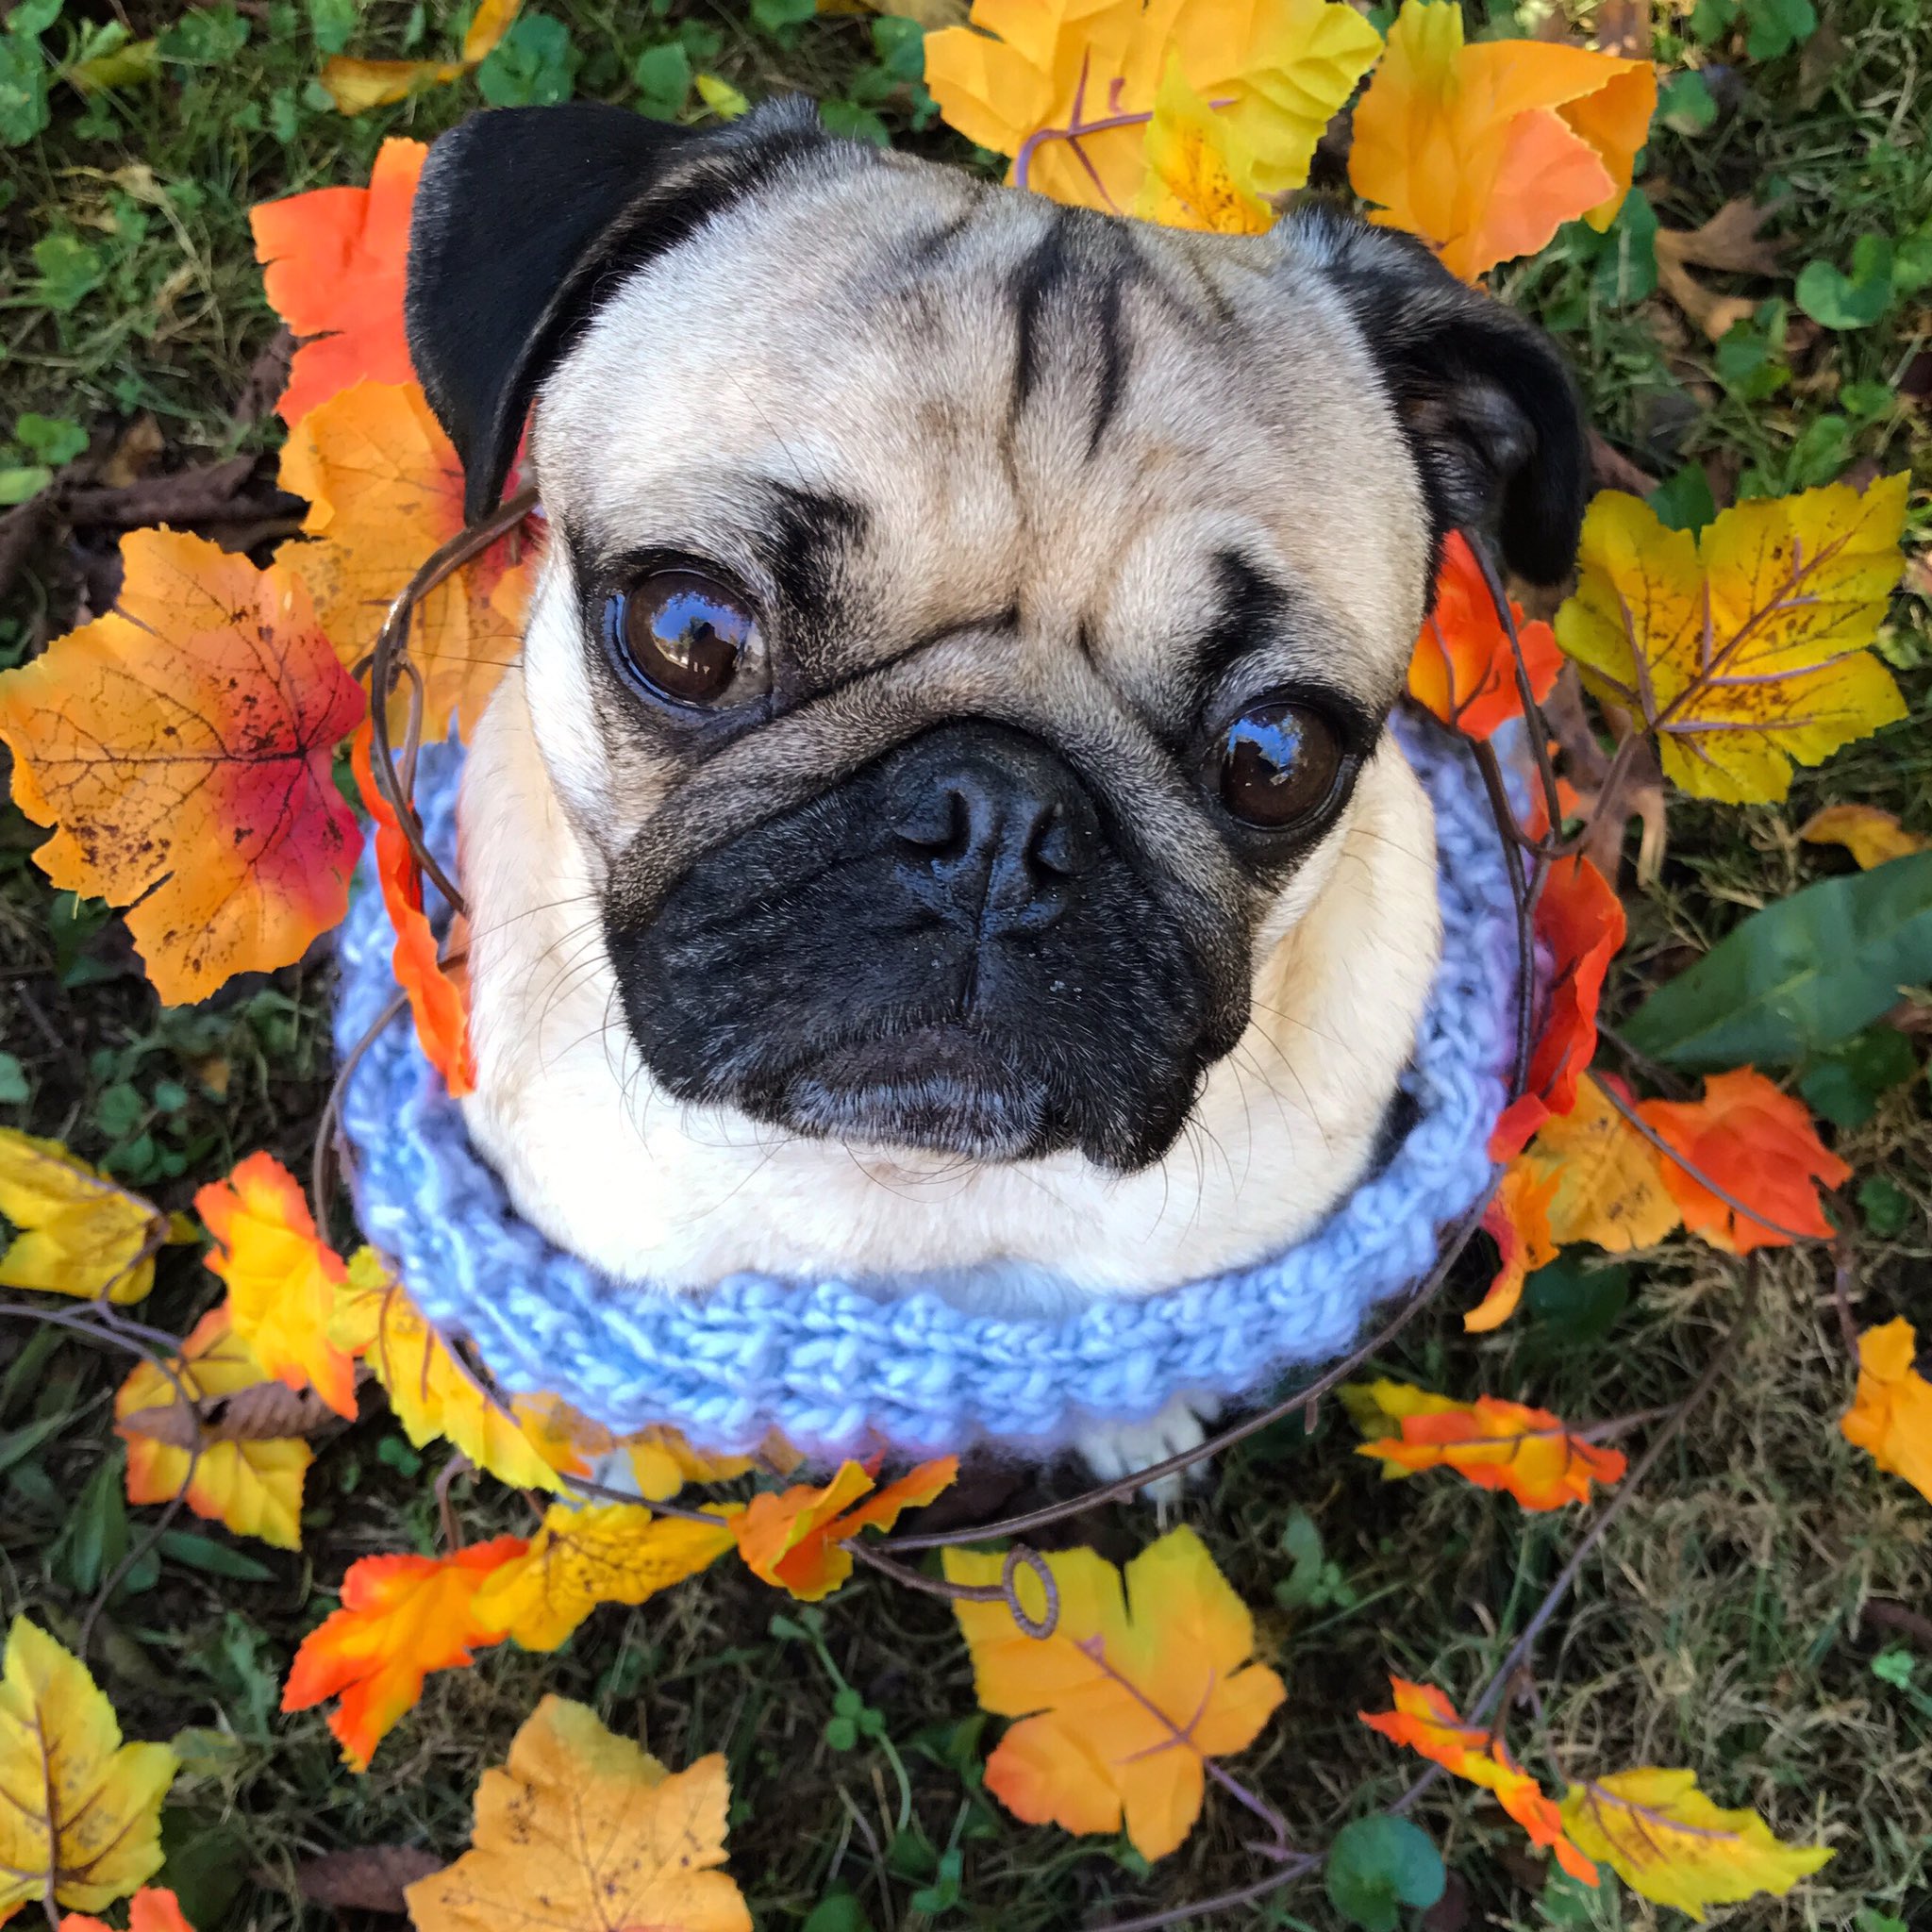 Doug The Pug on Twitter: "I live for photoshoots in the Fall 🍁…